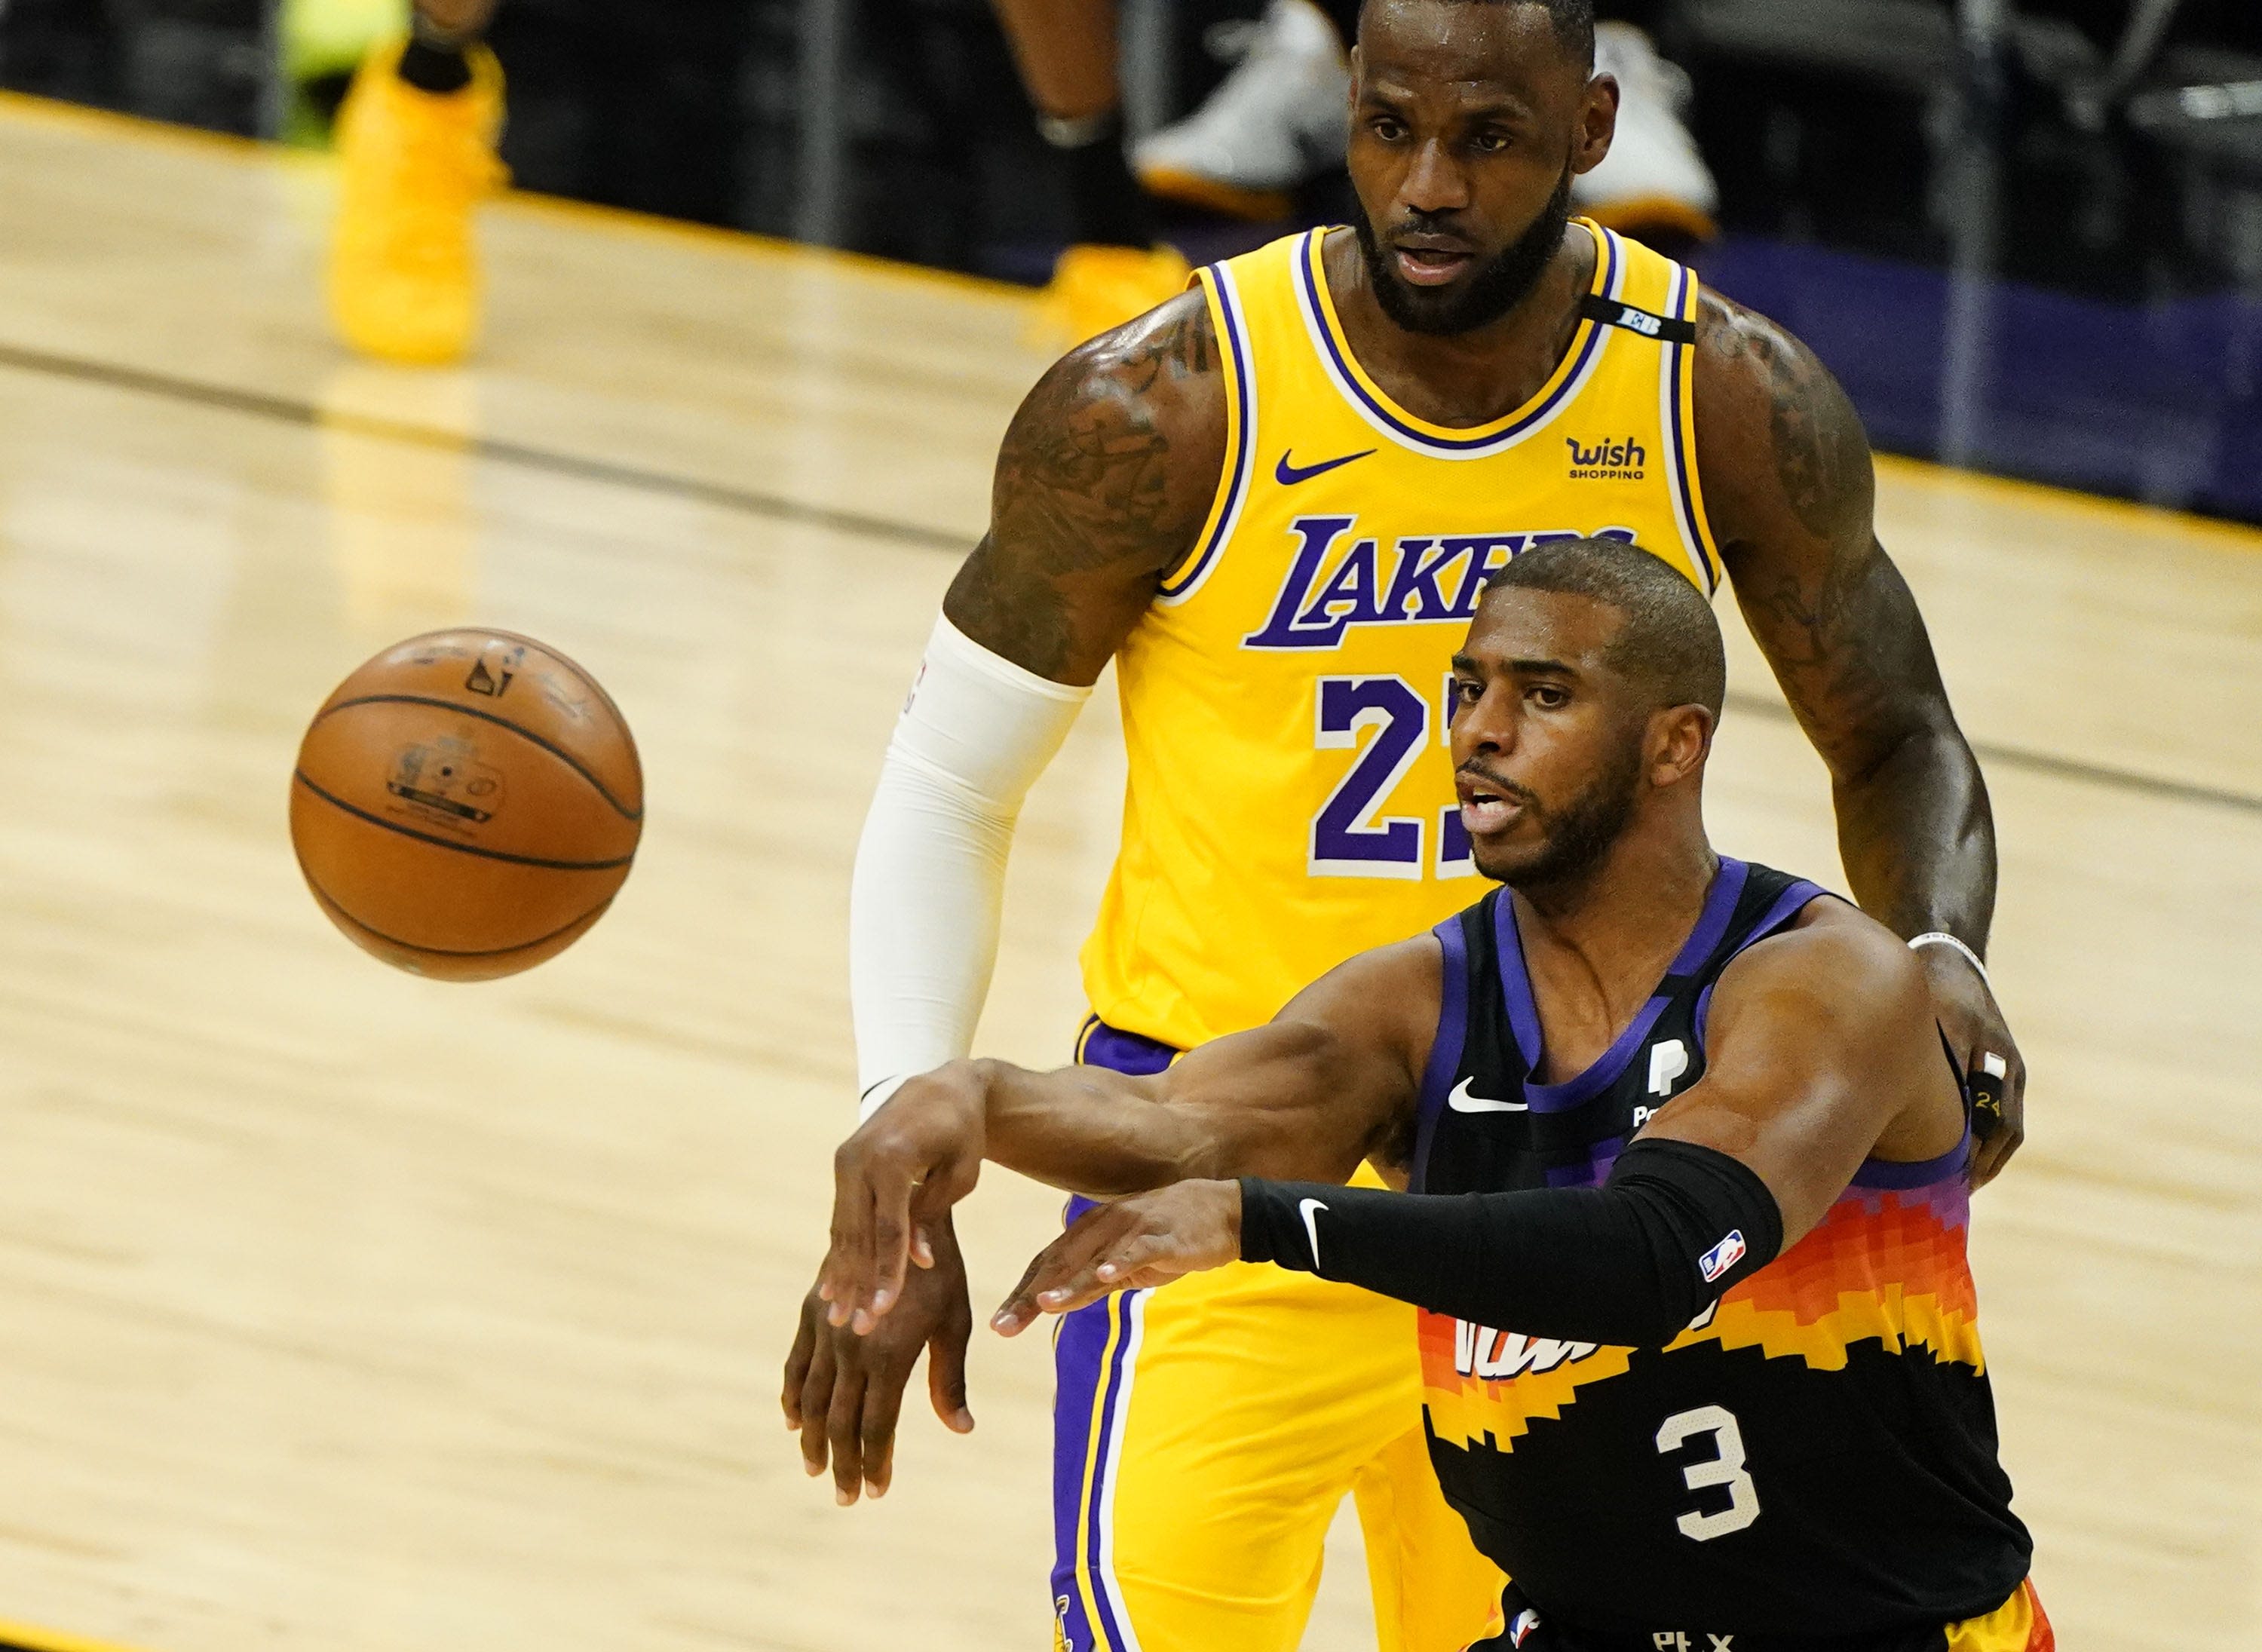 LeBron James to the Suns? Why stop there? Why not Chris Paul and Dwight Howard, too?